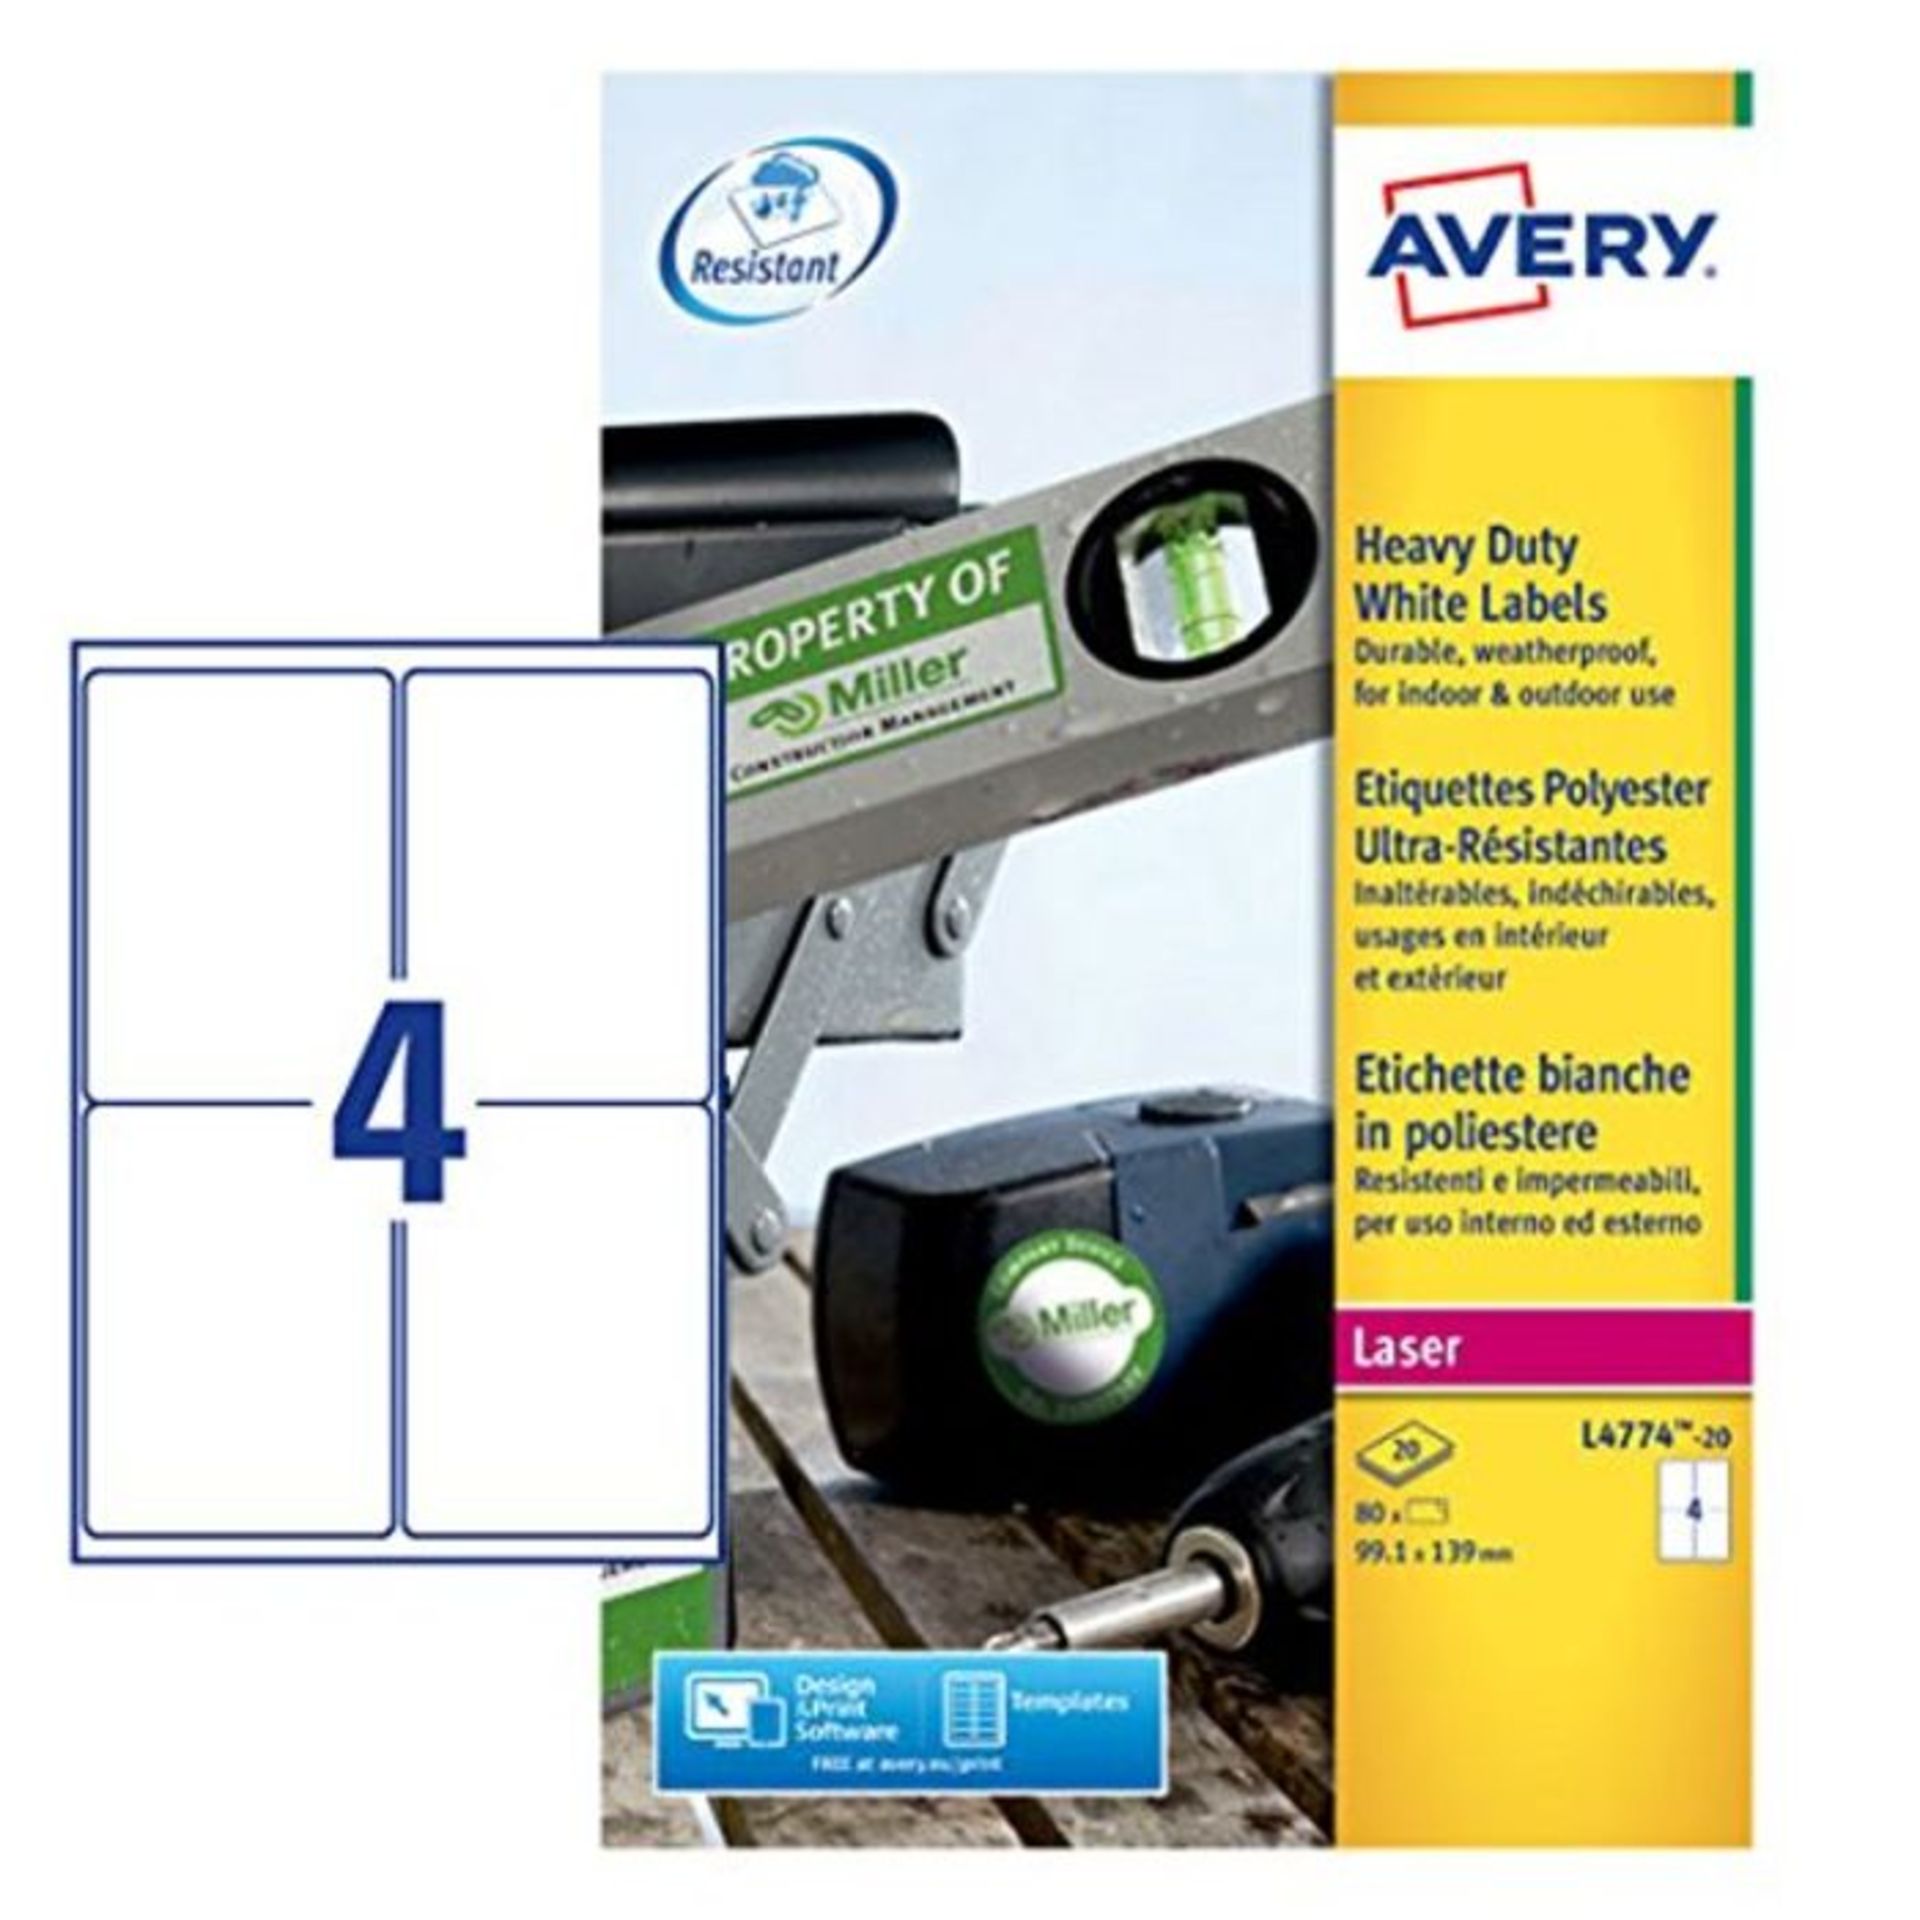 Avery L4774-20 Extra-Strong Adhesive Heavy Duty Weatherproof Labels, 4 Labels Per A4 S